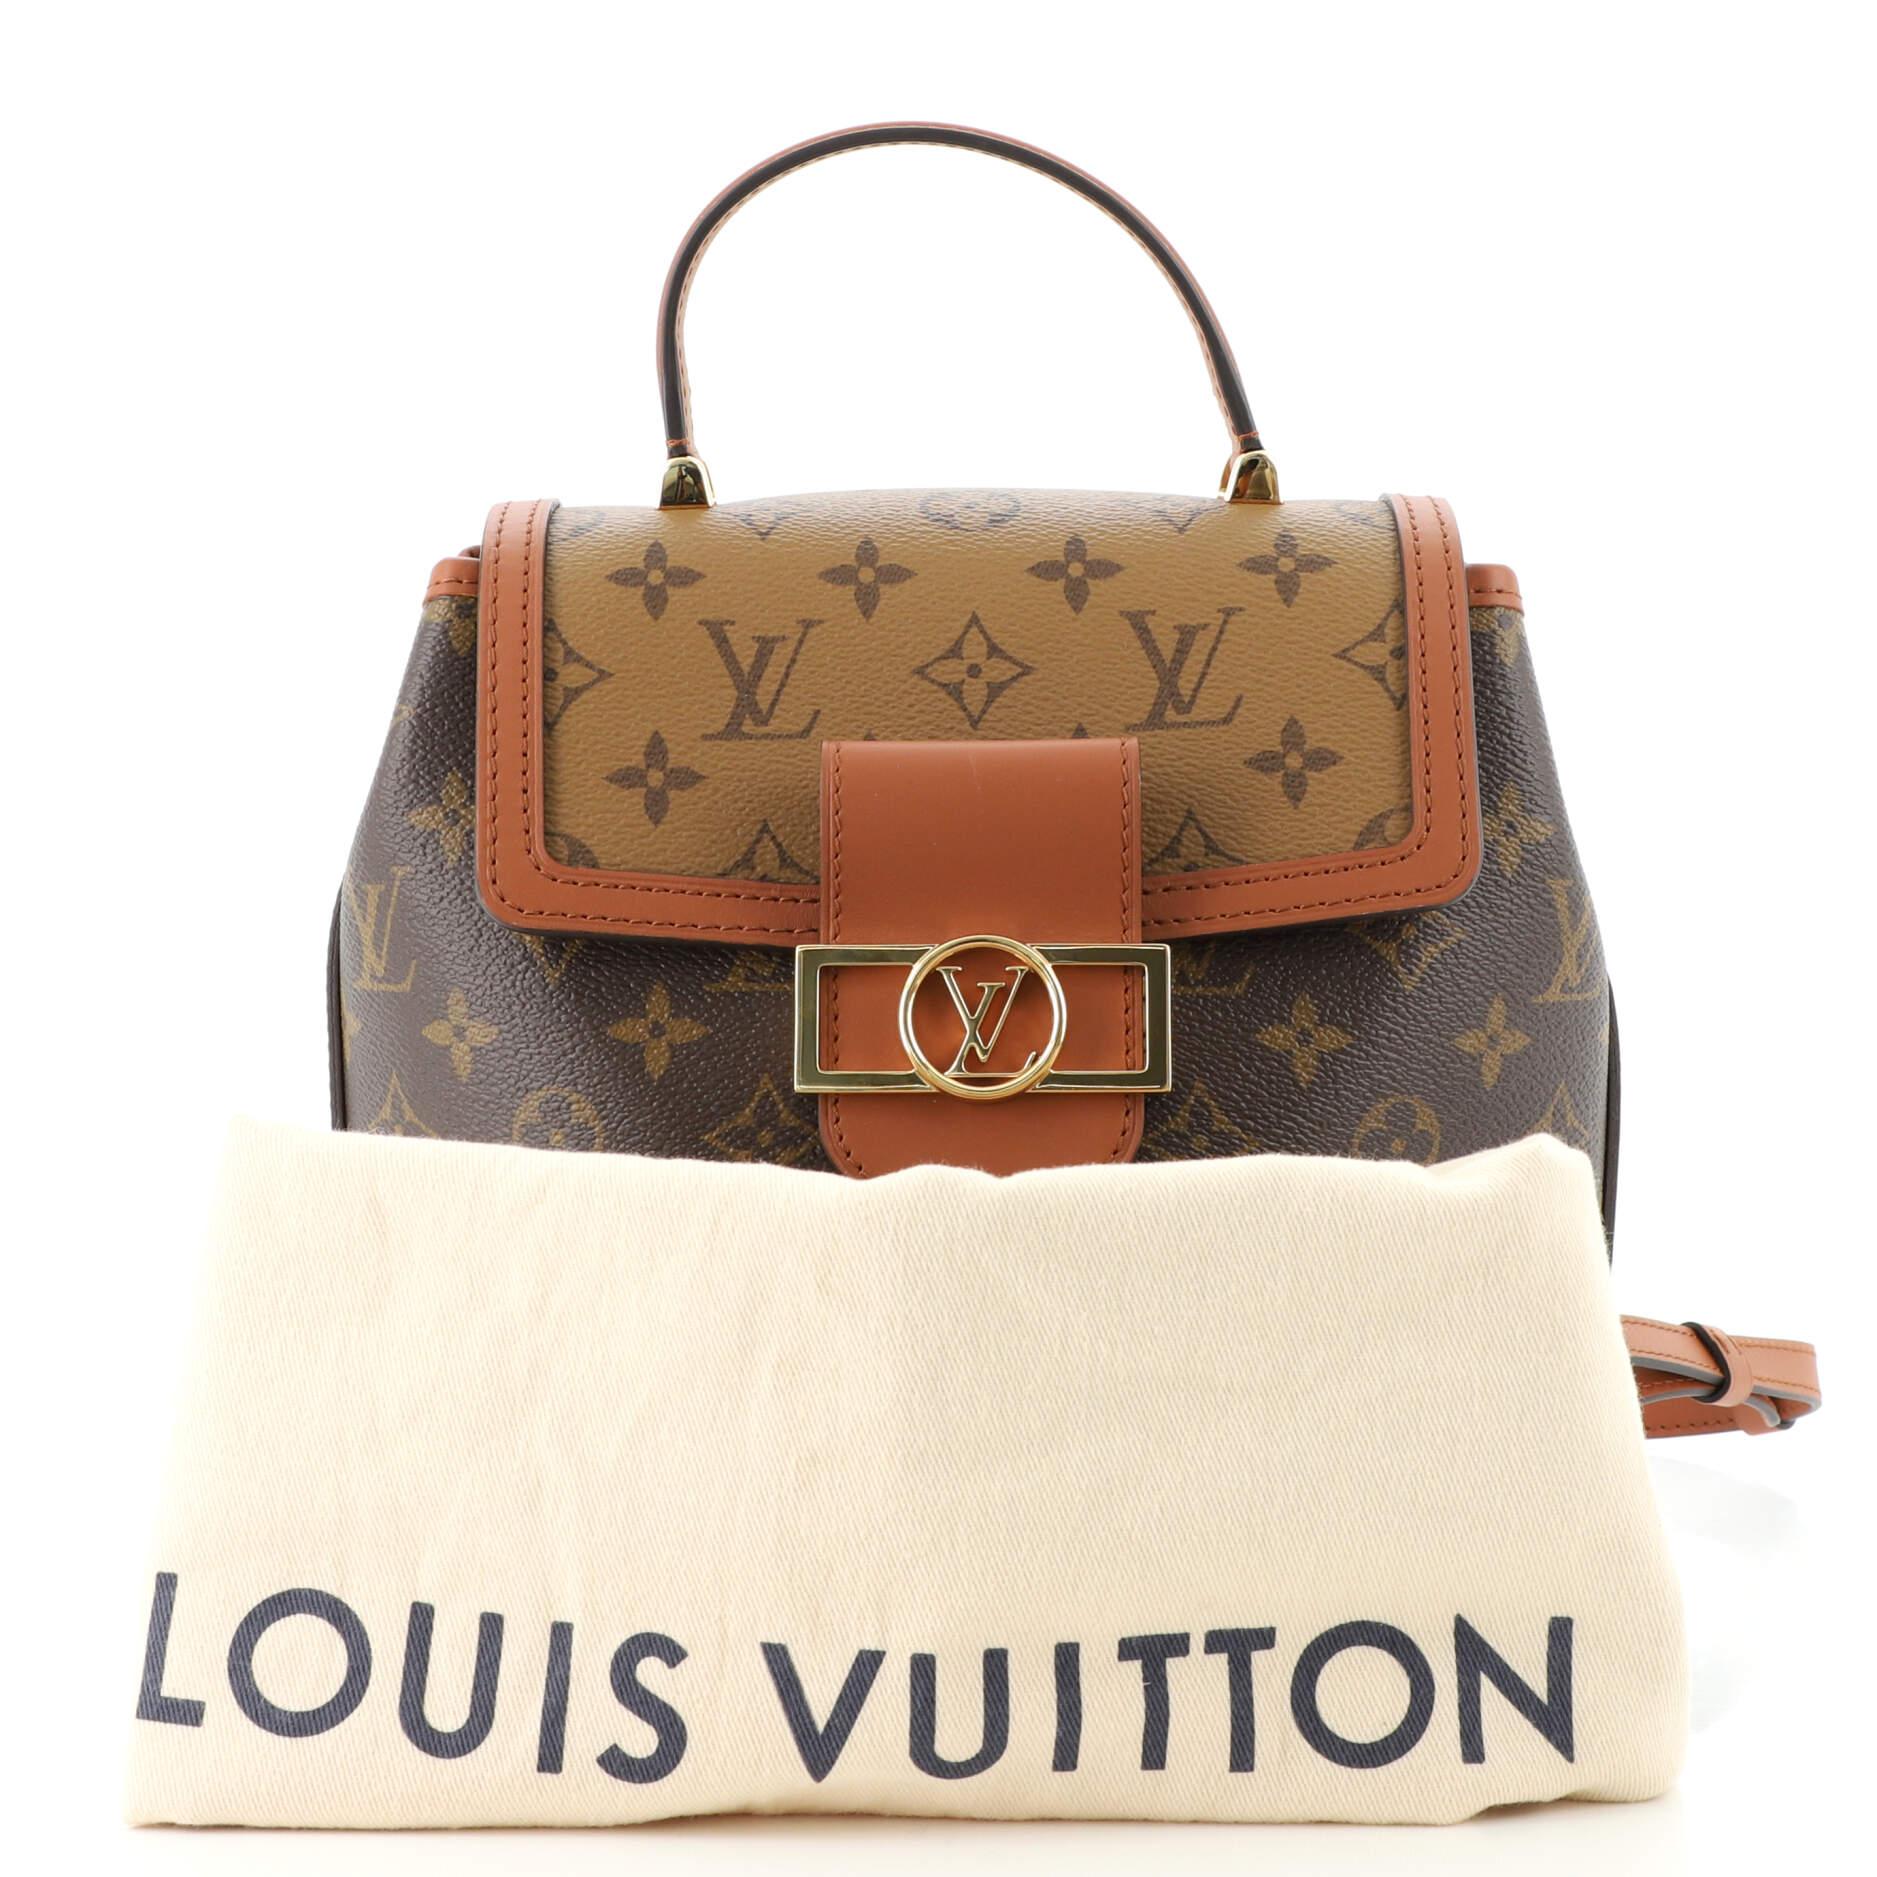 Ten Loves: Louis Vuitton Dauphine Bag, Exclusive to LV's New London  Flagship - 10 Magazine